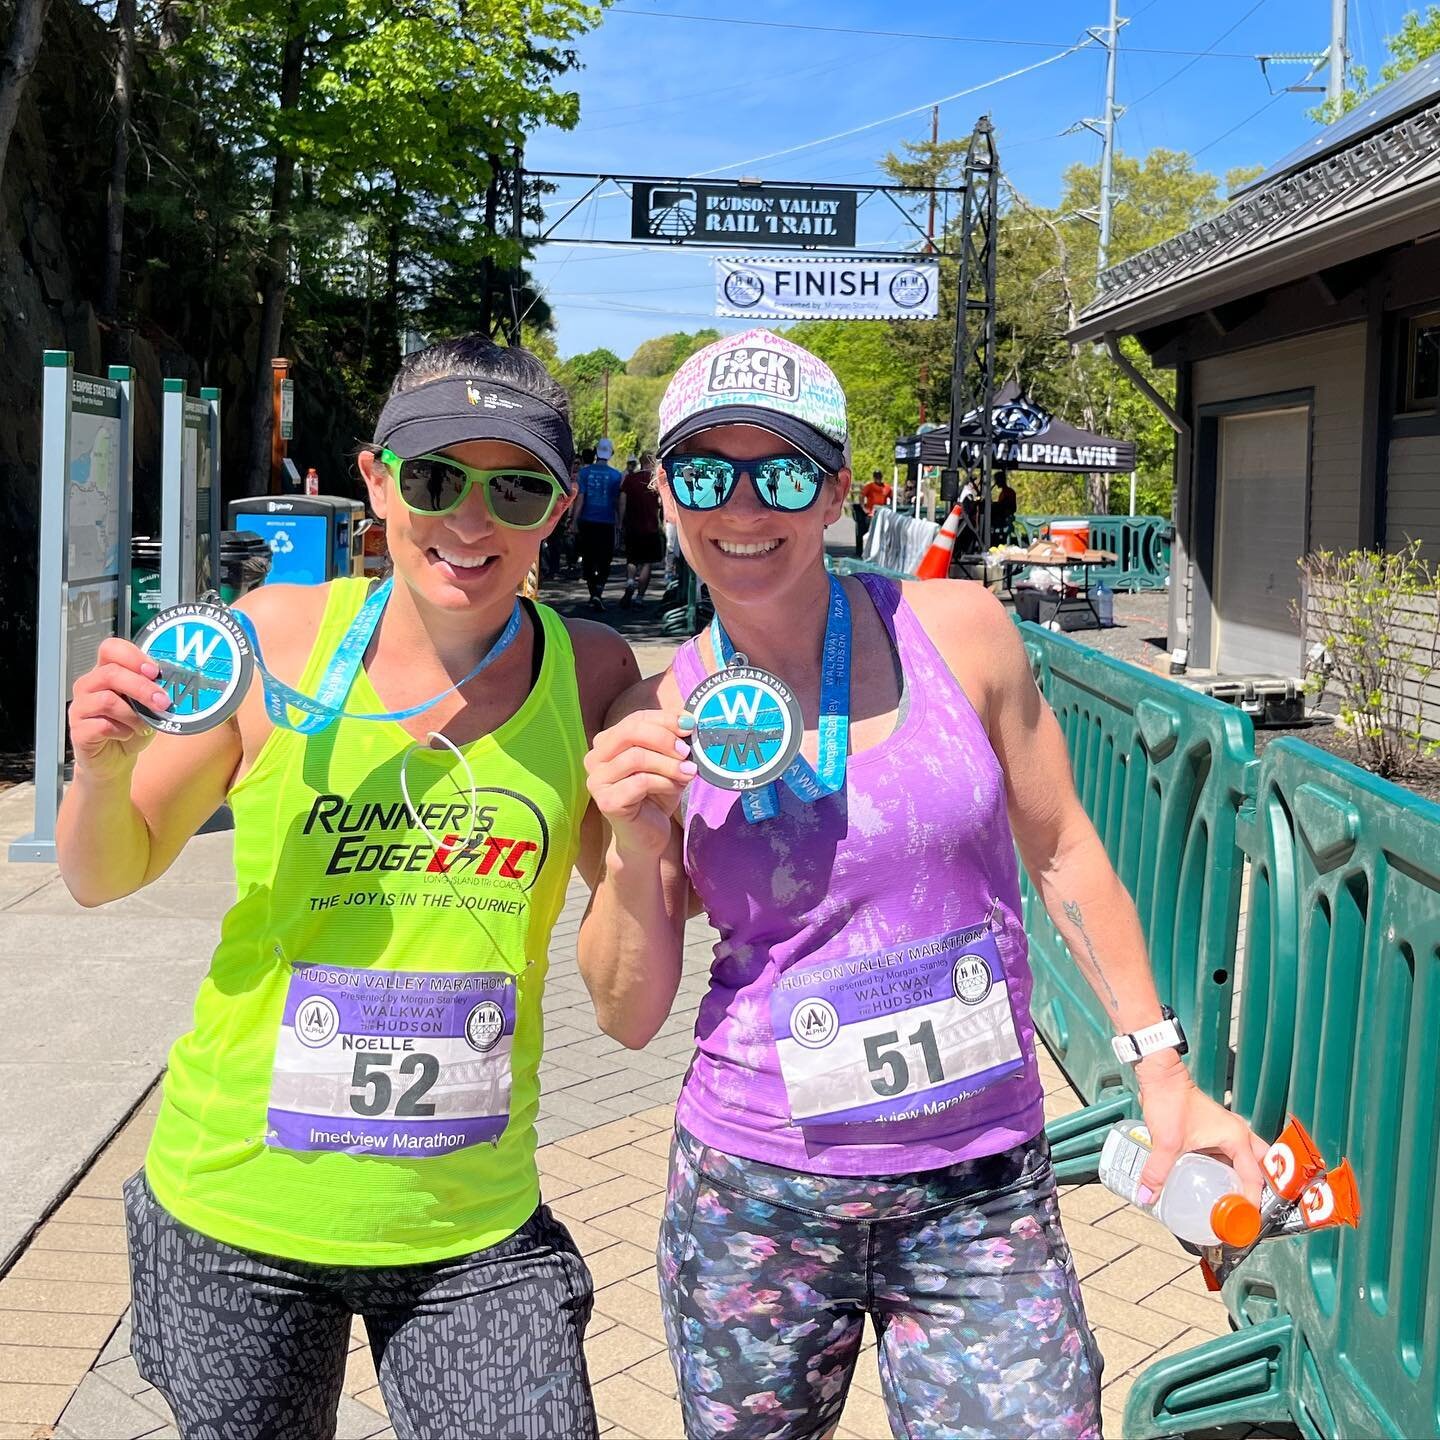 Another shoutout from last weekend goes to Heather Riddiough who BQ&rsquo;d (for the 5th time🫢) at the Hudson Valley Marathon!💪 She also dedicated her run to her friend&rsquo;s daughter, Callie, who passed away in 2020 from DPIG.🙏🤍

&ldquo;Ahh wh